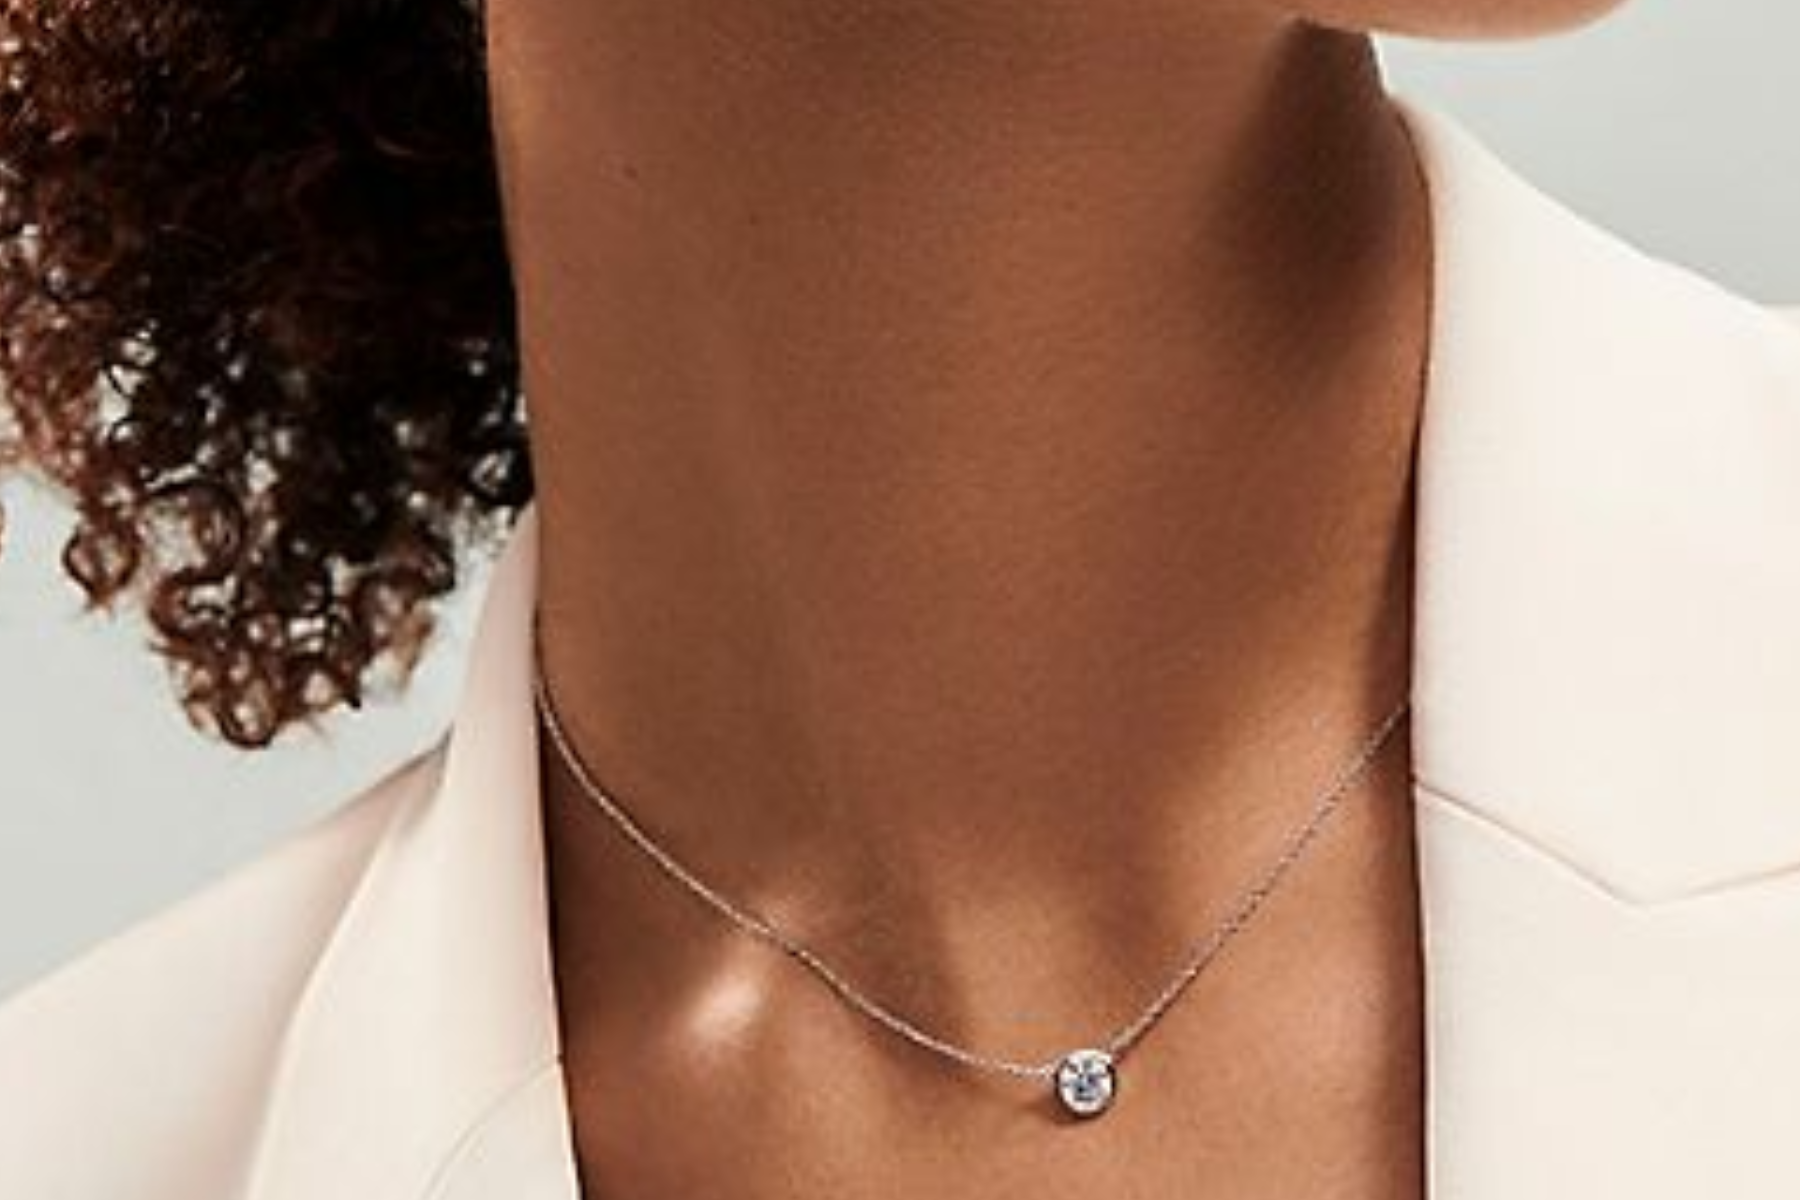 Diamond Pendant Necklaces For Women - Look More Expensive